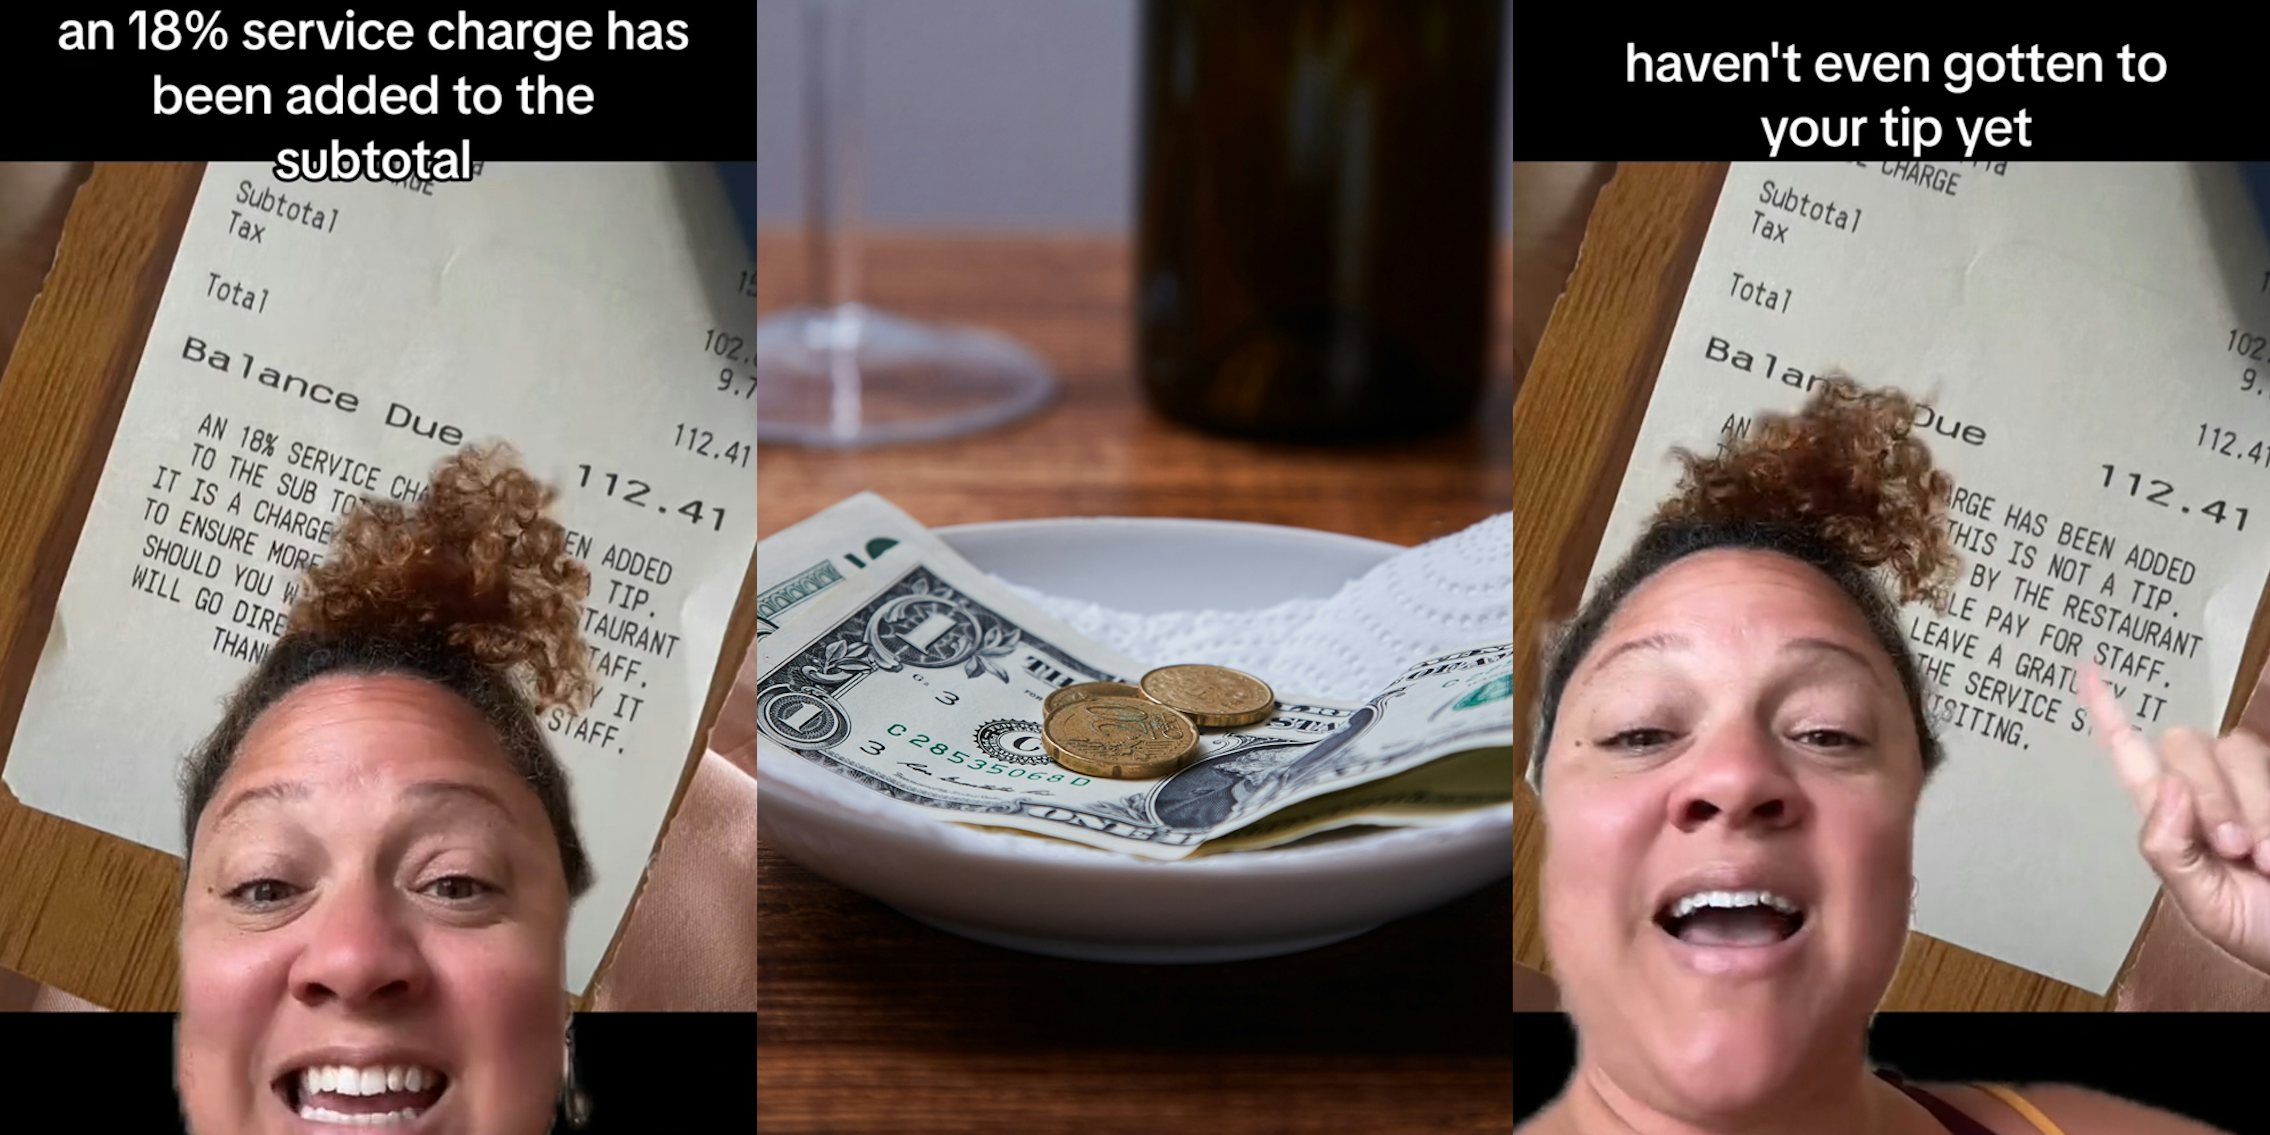 woman greenscreen TikTok over restaurant receipt with caption 'an 18% service charge has been added to the subtotal' (l) tip on plate in restaurant (c) woman greenscreen TikTok over restaurant receipt with caption 'haven't even gotten to your tip yet' (r)